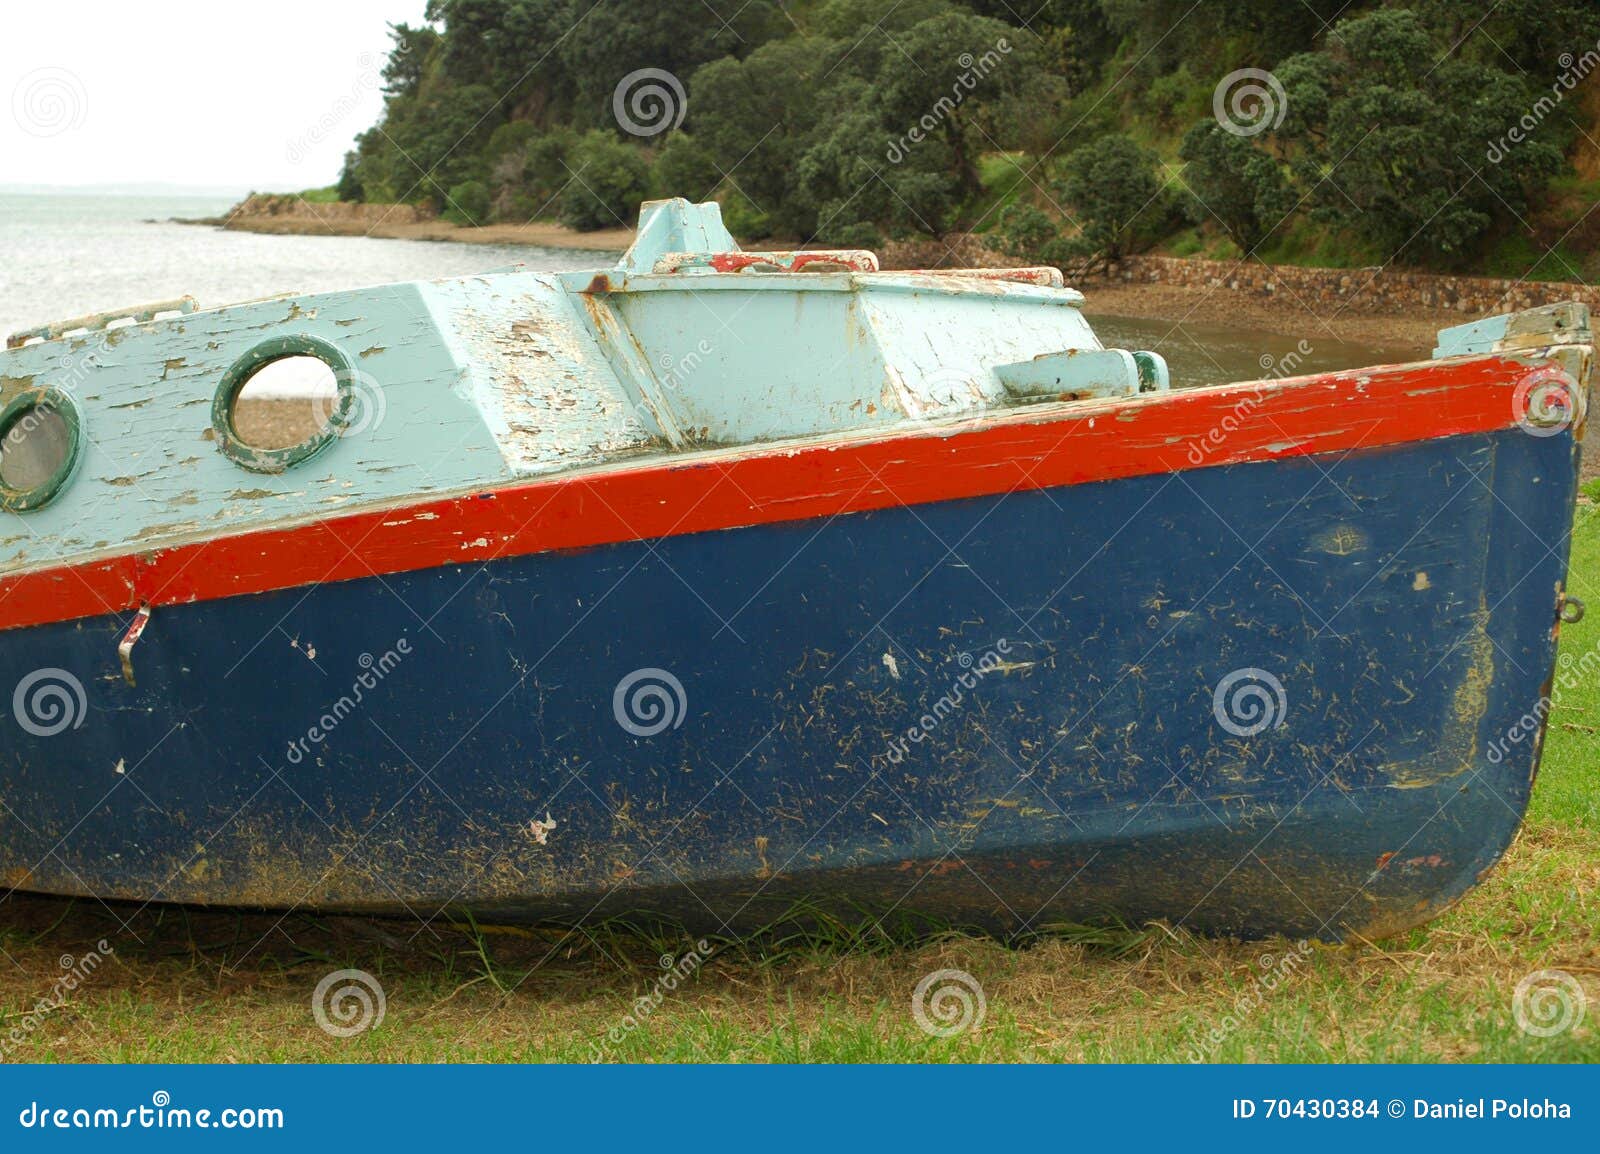 Wreck of Small Plywood Sailboat Stock Photo - Image of boat, vintage:  70430384